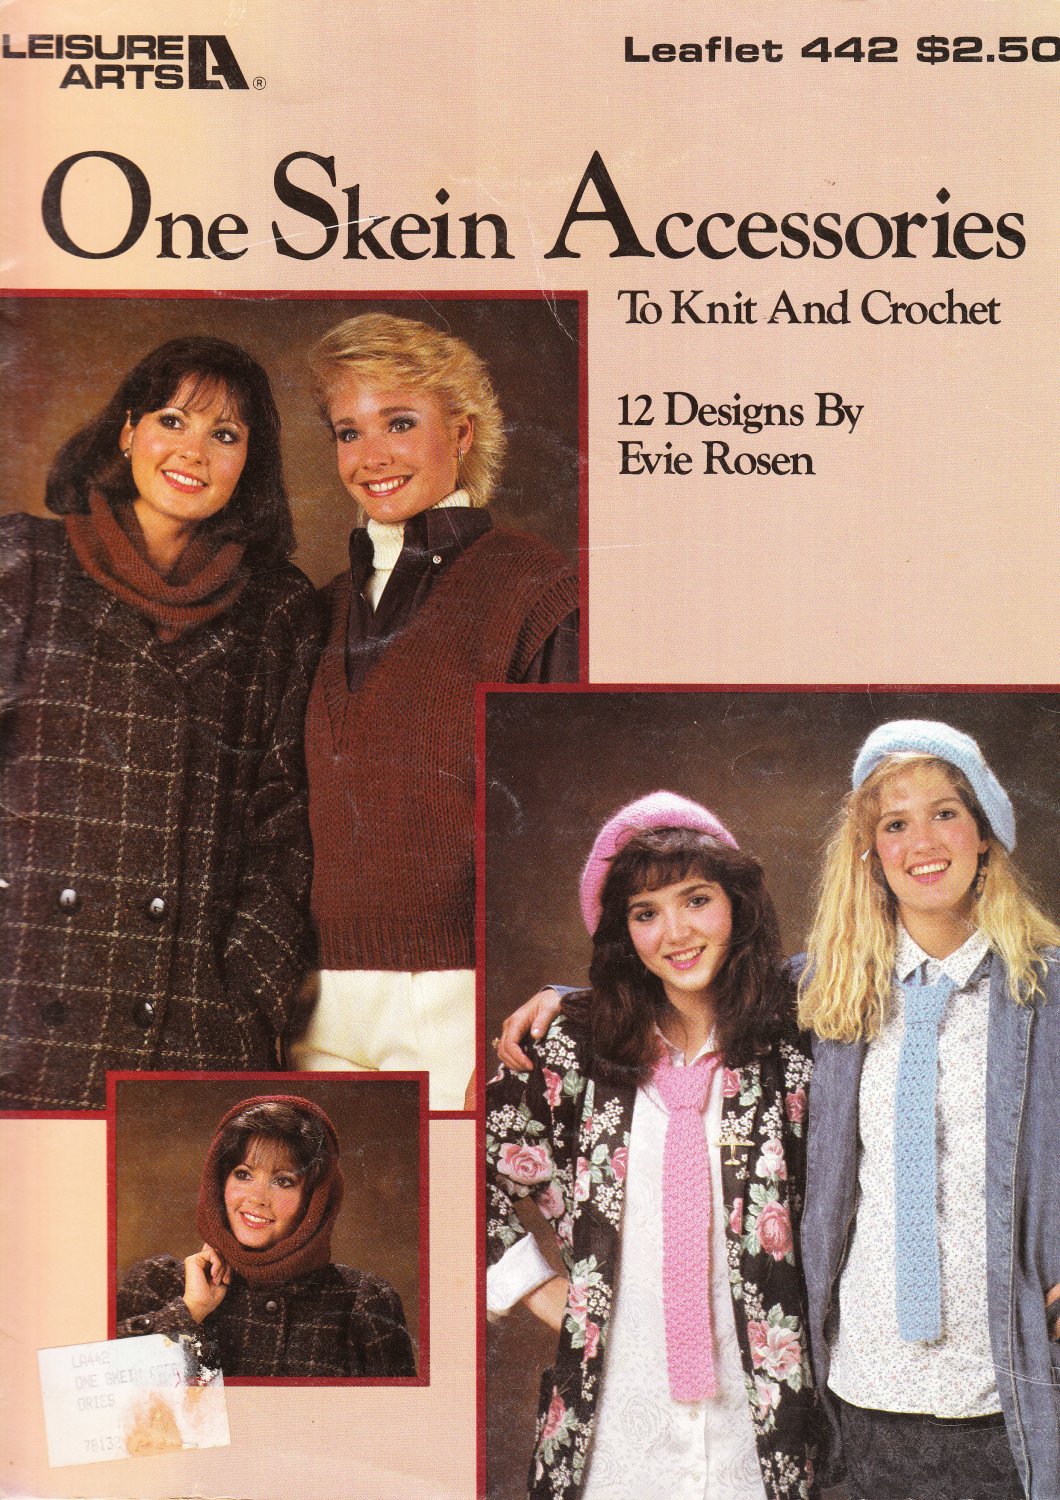 Leisure Arts One Skein Accessories 1986 Knit and Crochet Pattern Leaflet #442